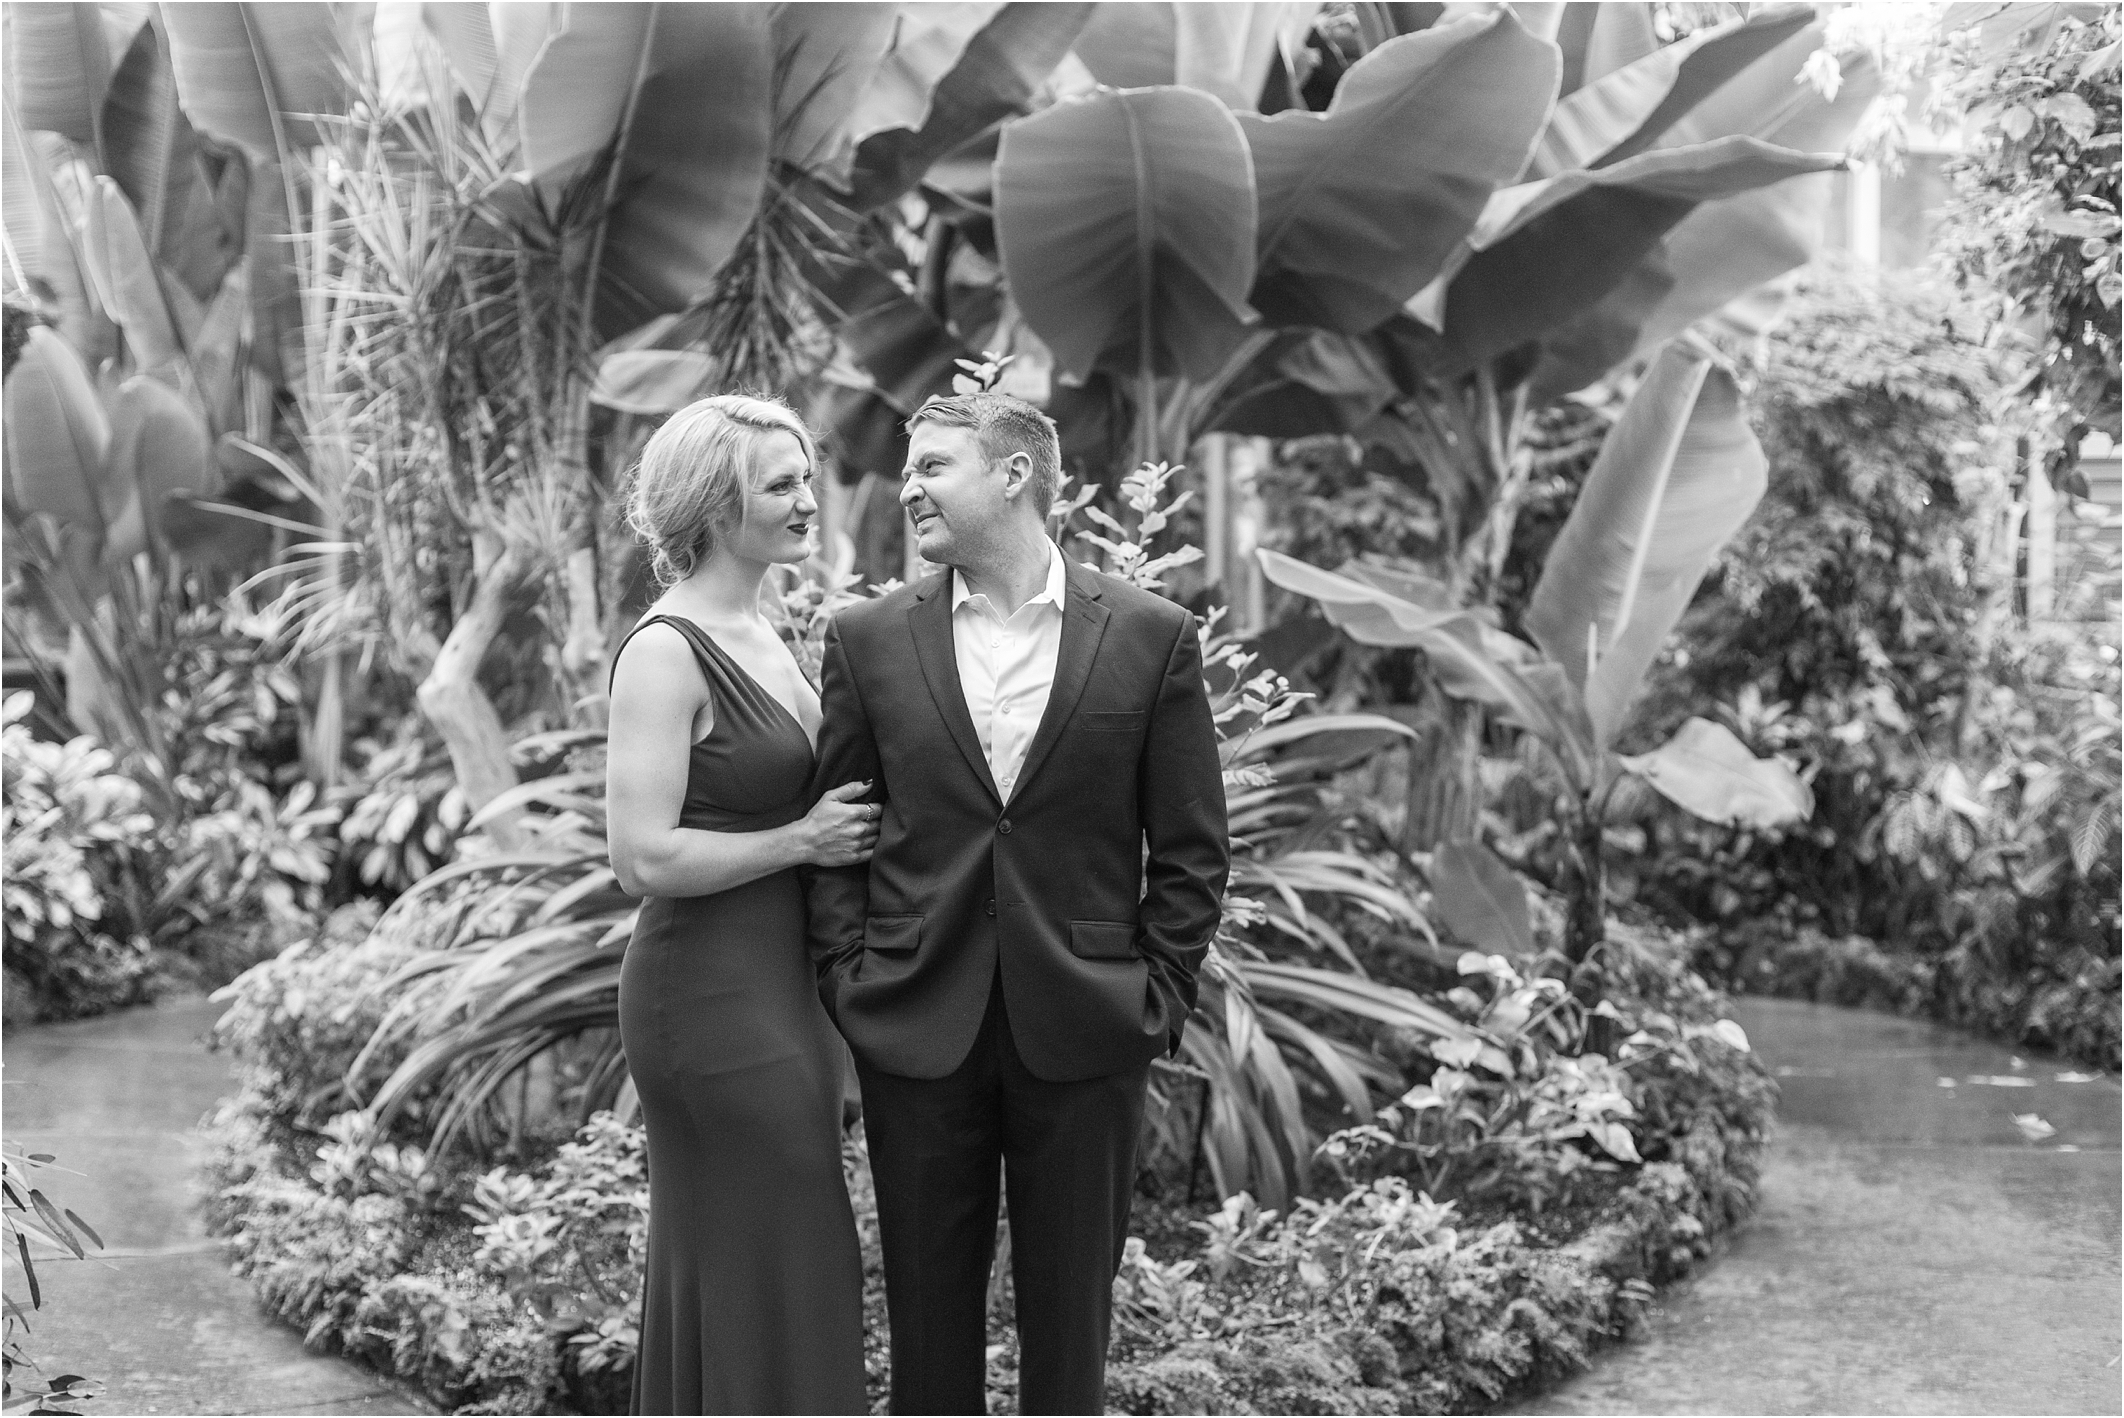 elegant-classic-belle-isle-conservatory-engagement-photos-in-detroit-mi-by-courtney-carolyn-photography_0003.jpg